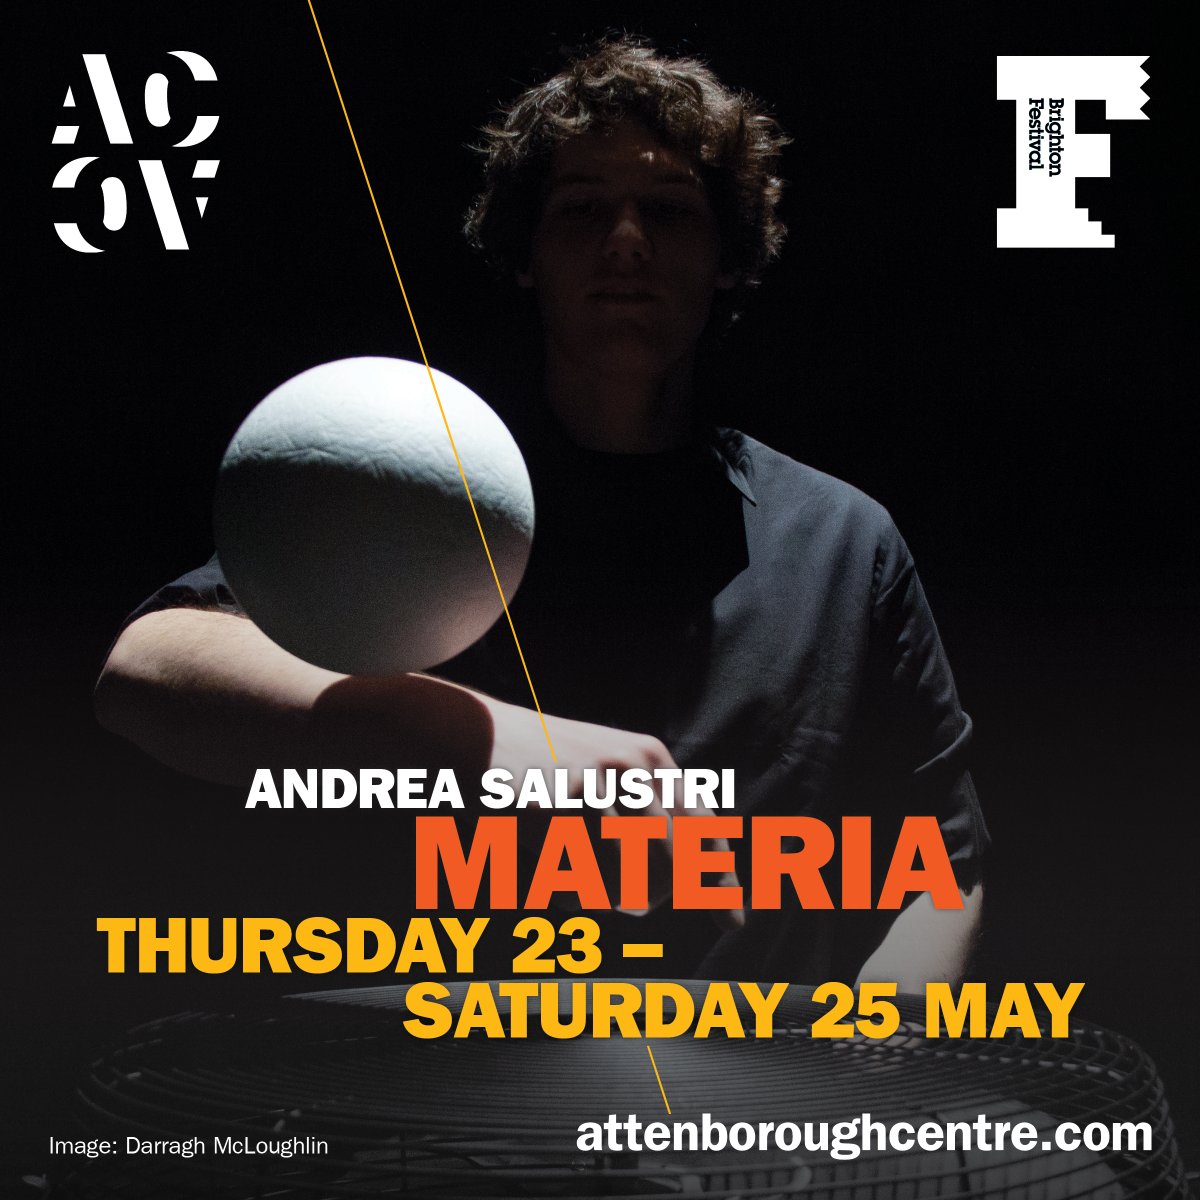 In a magical world of objects, between contemporary circus, choreography & beguiling physical theatre, #andreasalustri's 'Materia' is a pas-de-deux between performer & polystyrene. Part of @BrightonFestival 📅23-25 May 📌 @attenboroughctr 🎟 Tickets: ow.ly/we5850QVoEy